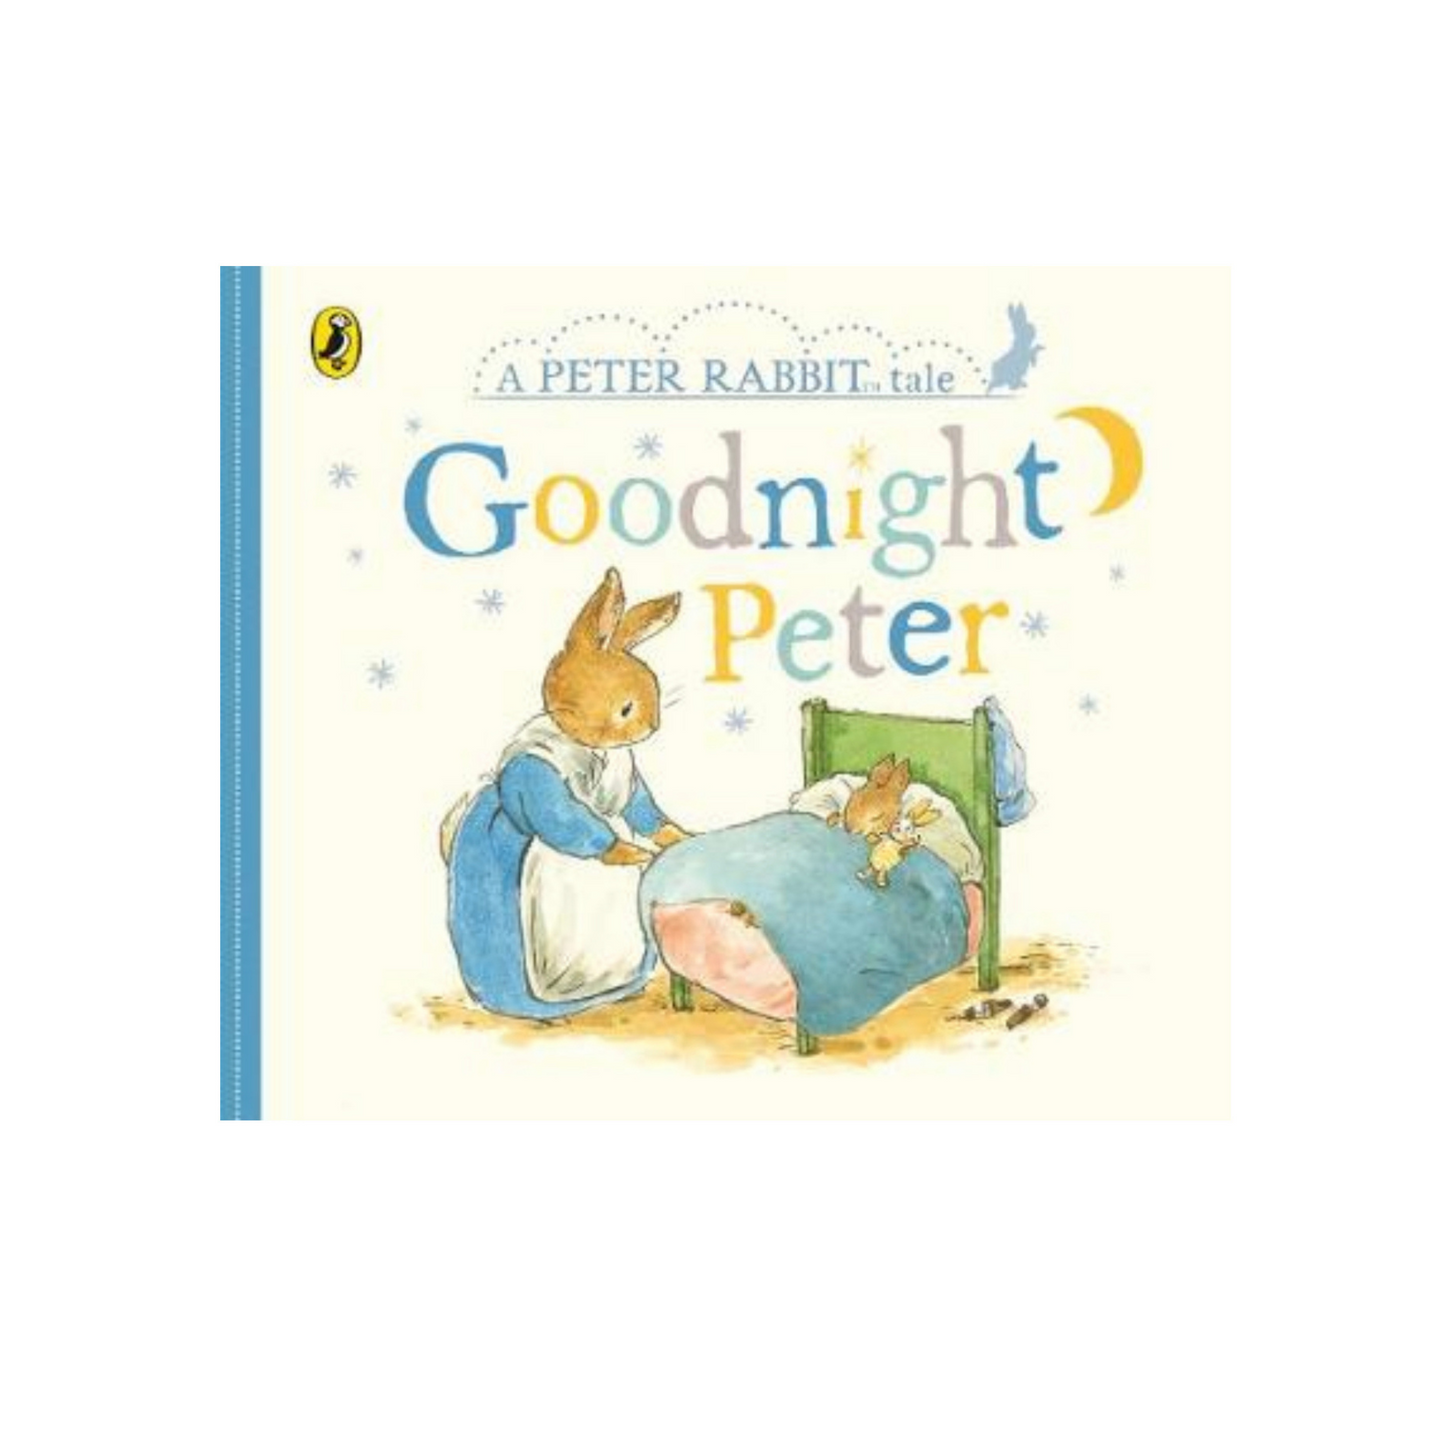 Load image into Gallery viewer, Goodnight Peter Rabbit Gift Box
